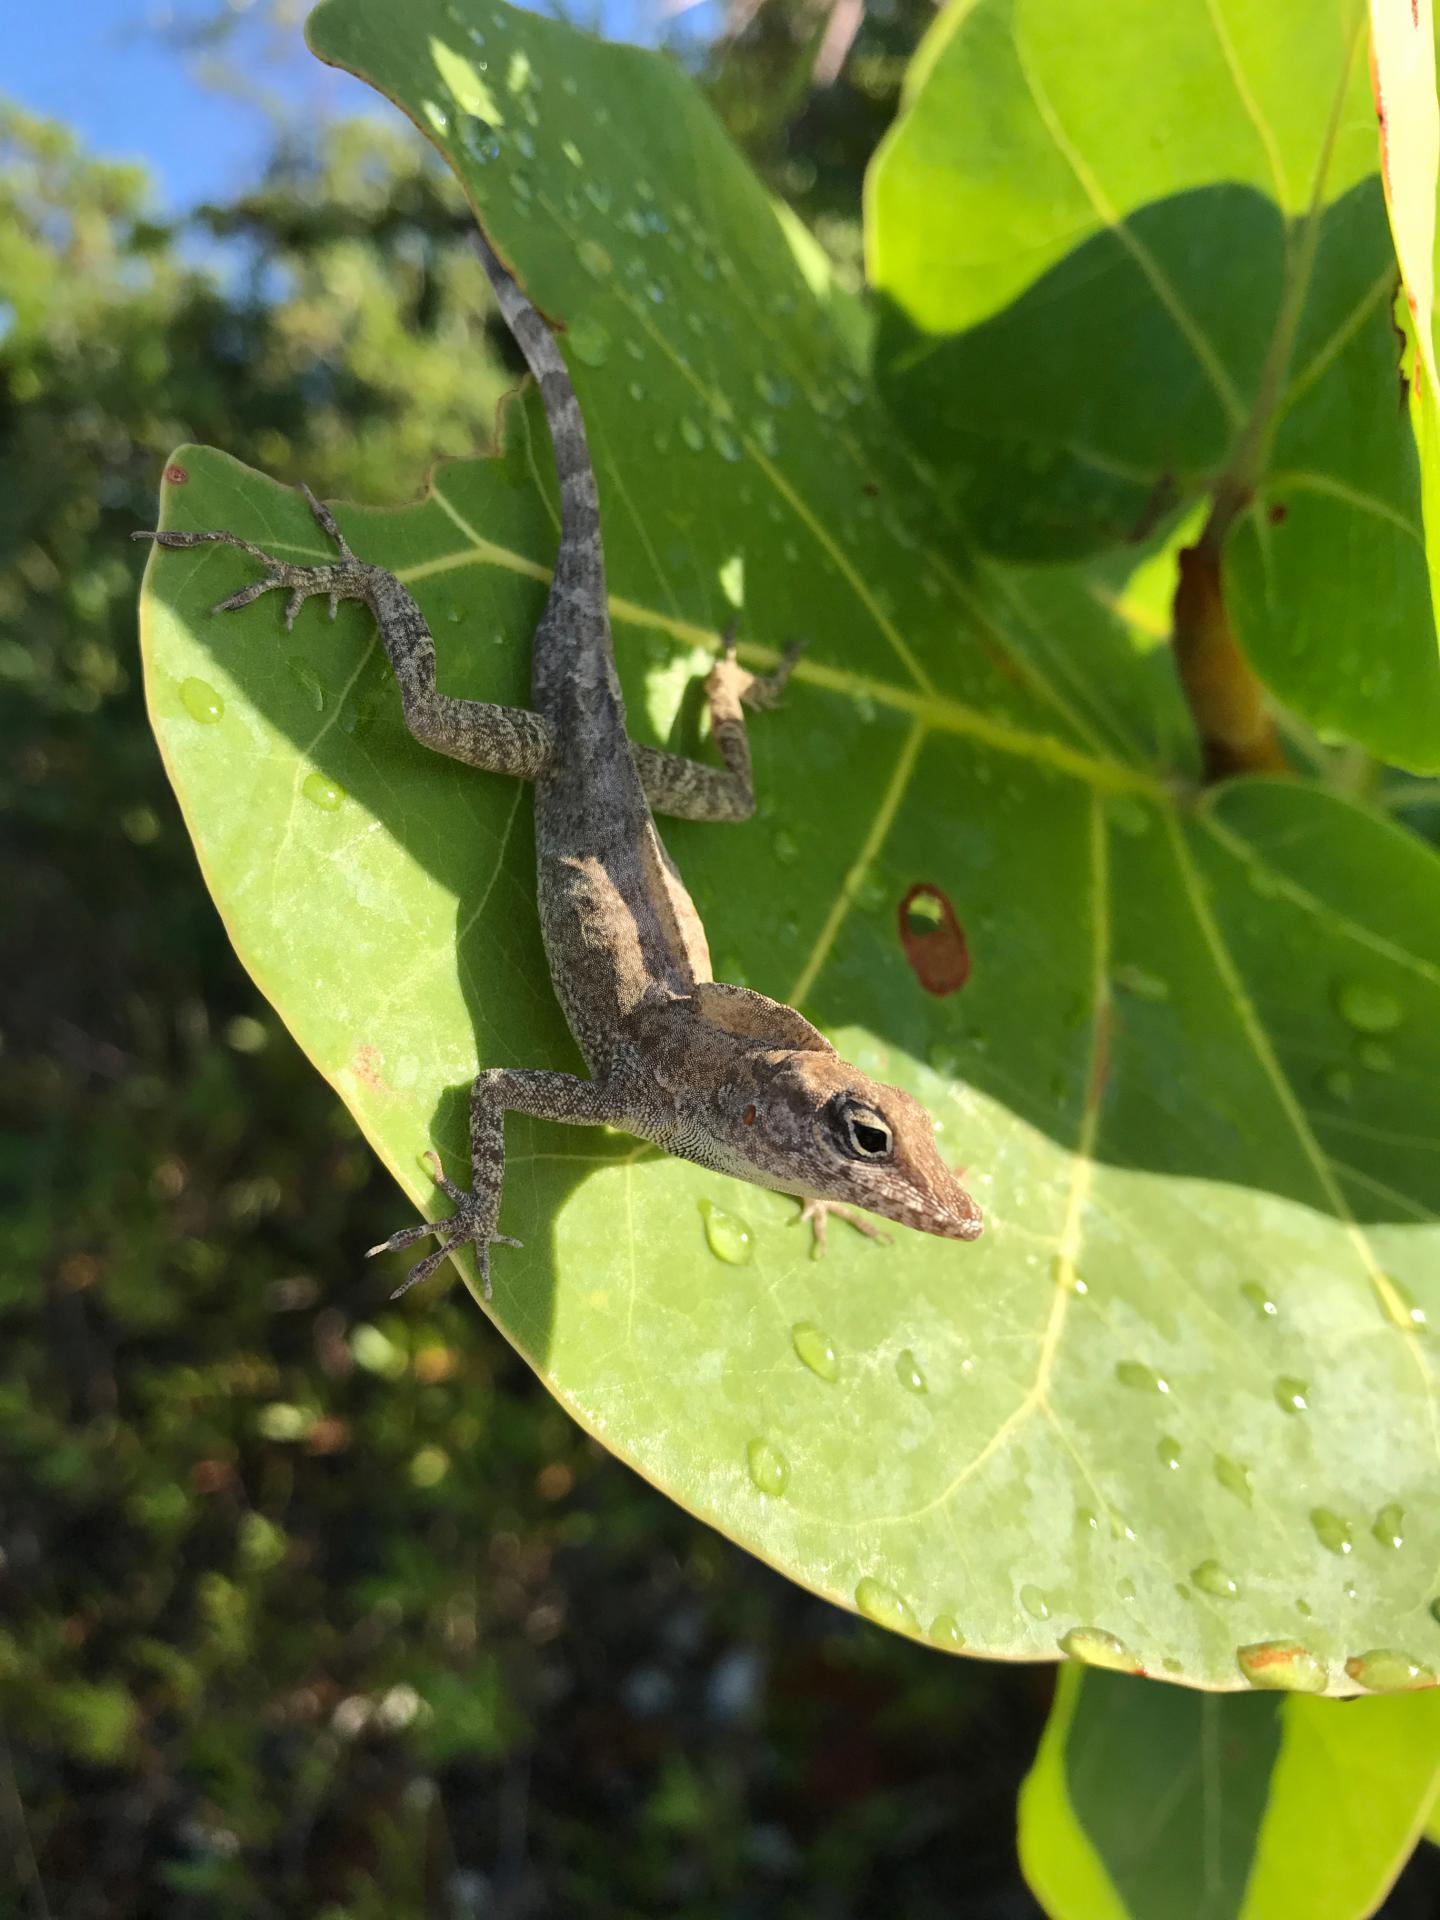 Anolis scriptus Perched on a Leaf in Turks and Caicos